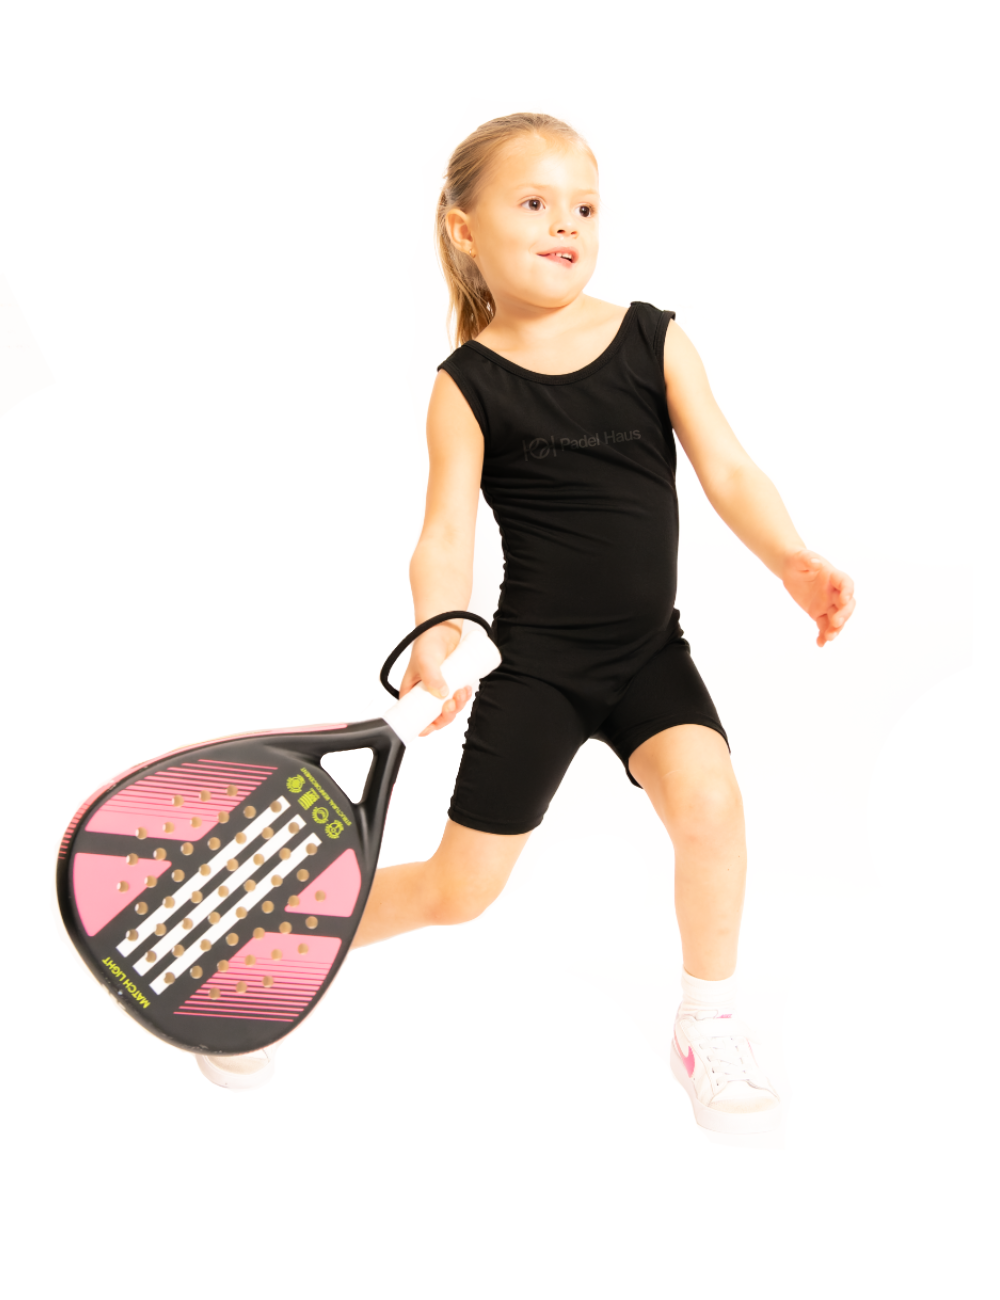 Padel lessons for Juniors in Brooklyn and Long Island. Pickleball Courts, Padel Jr lessons & Summer Camp in Brooklyn